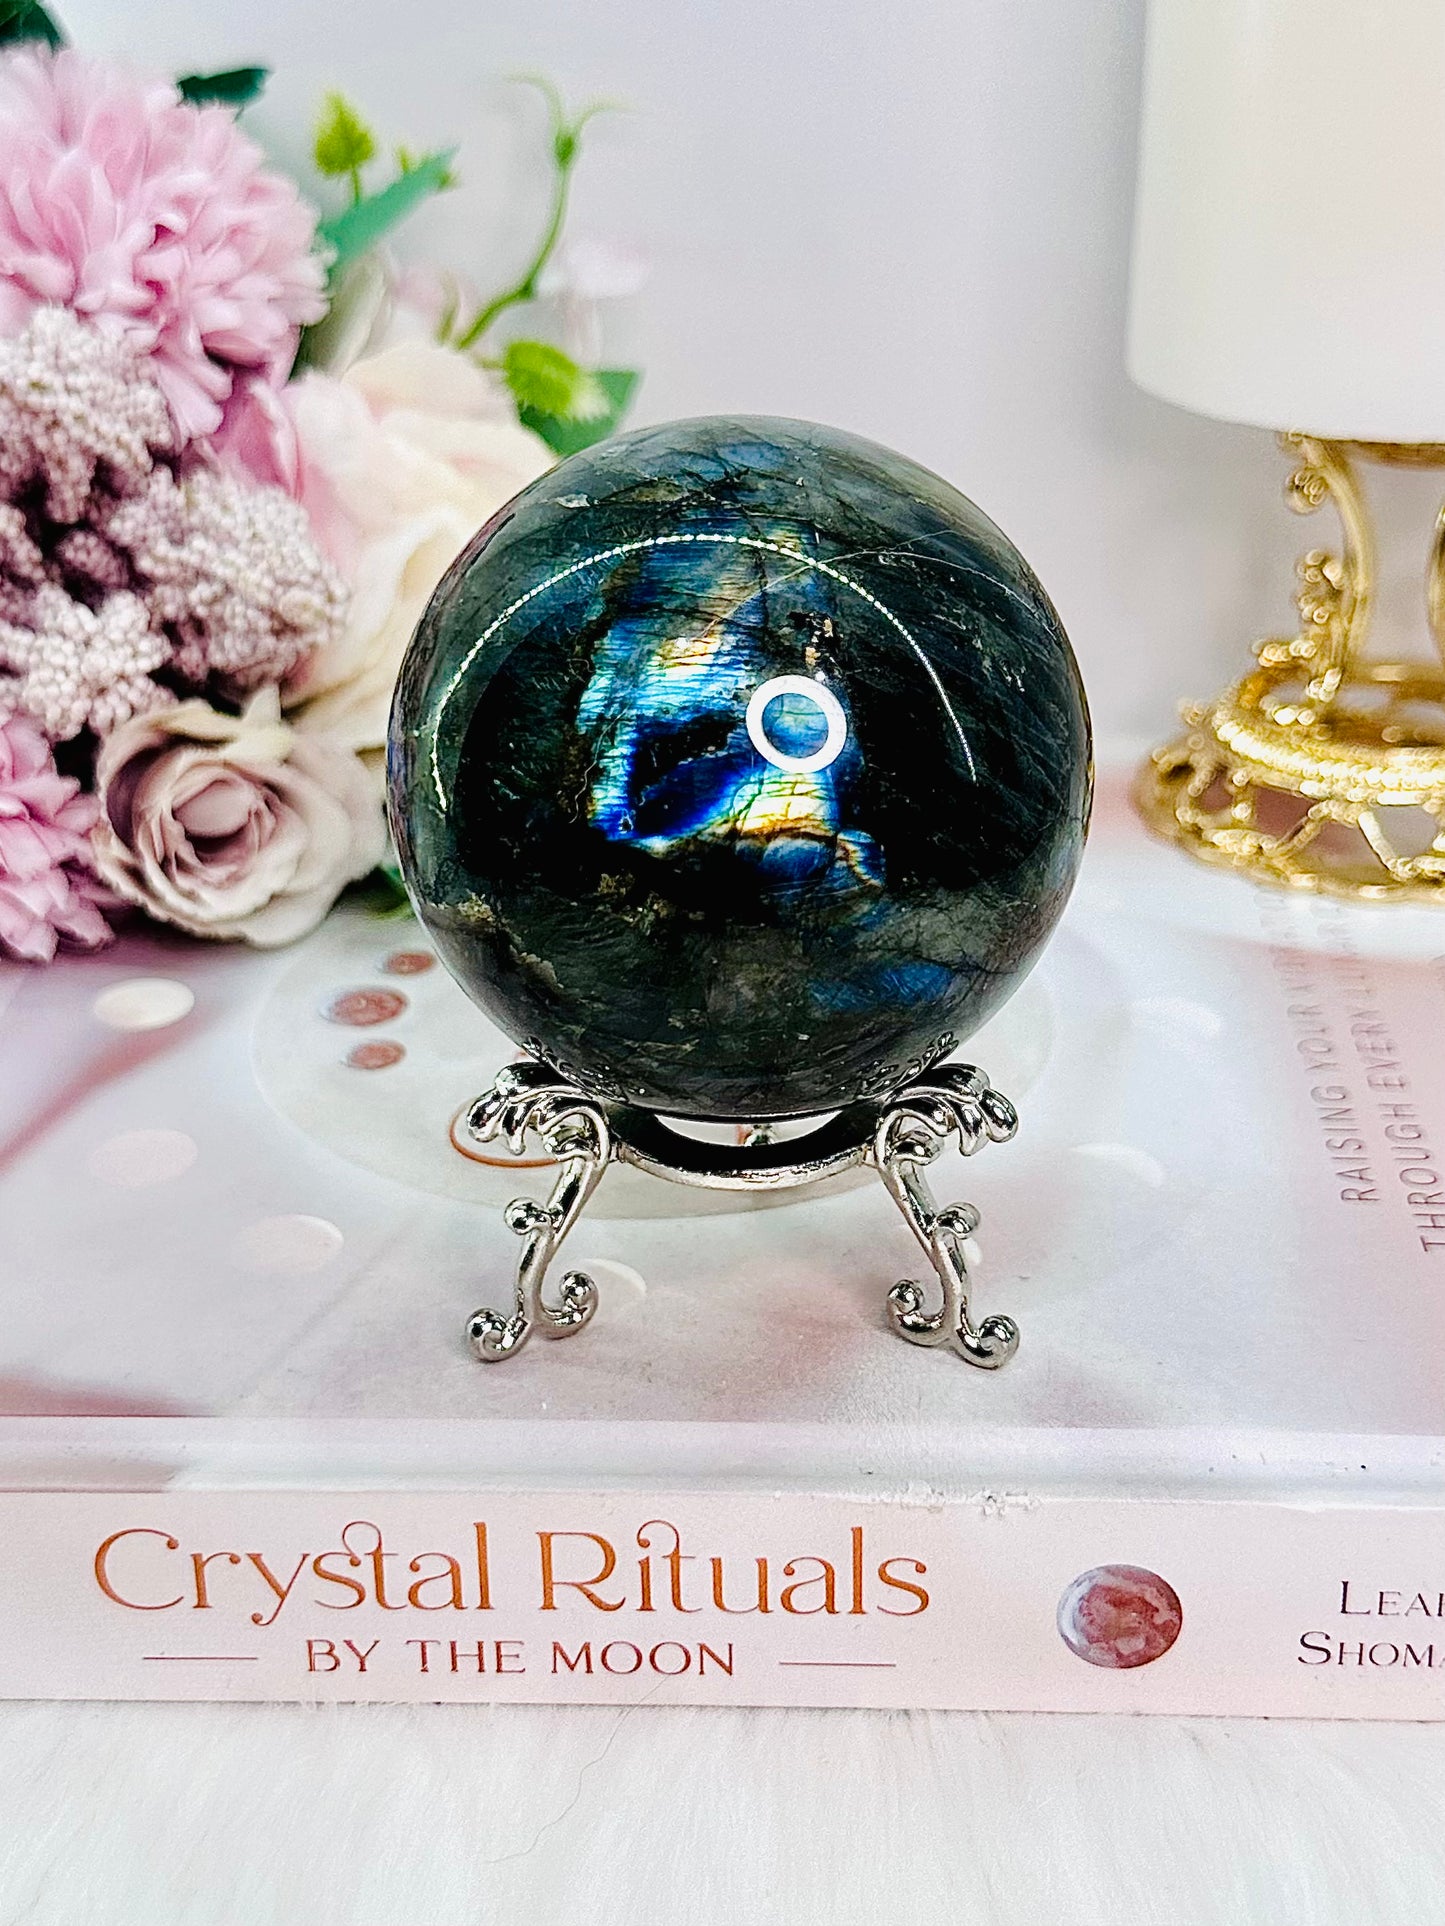 Gorgeous Large 406gram Labradorite Sphere On Stand with Beautiful Flash